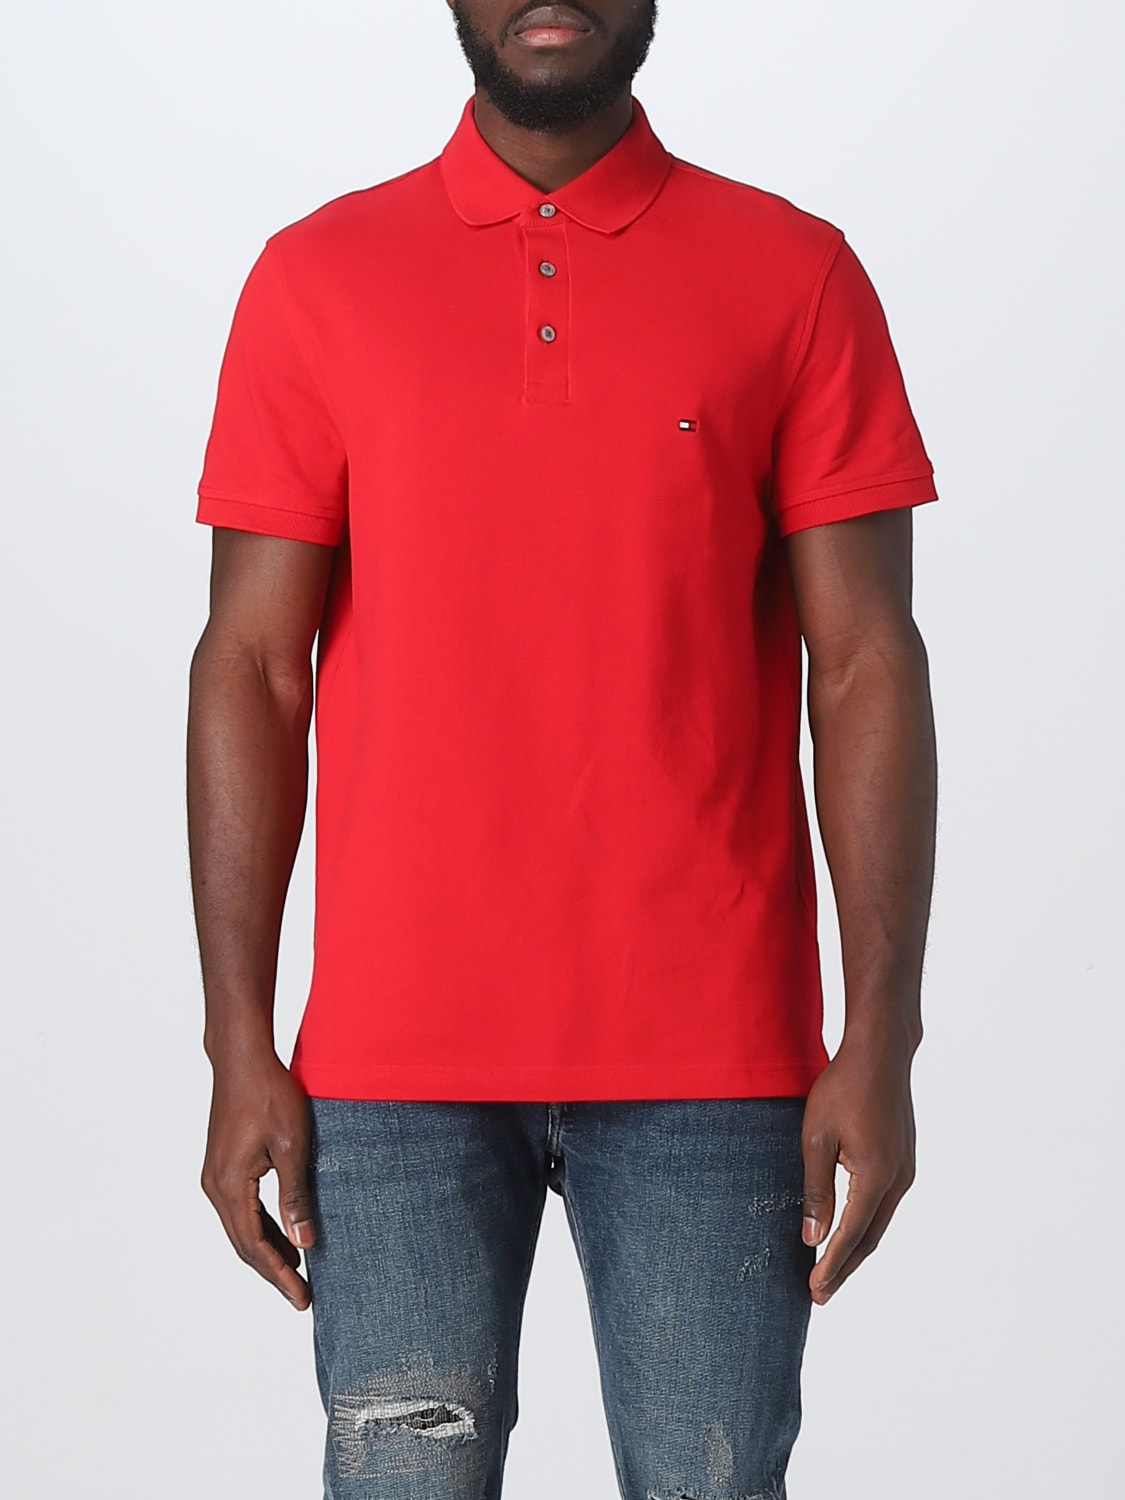 TOMMY HILFIGER: polo shirt man Red | Tommy polo shirt MW0MW17771 online at